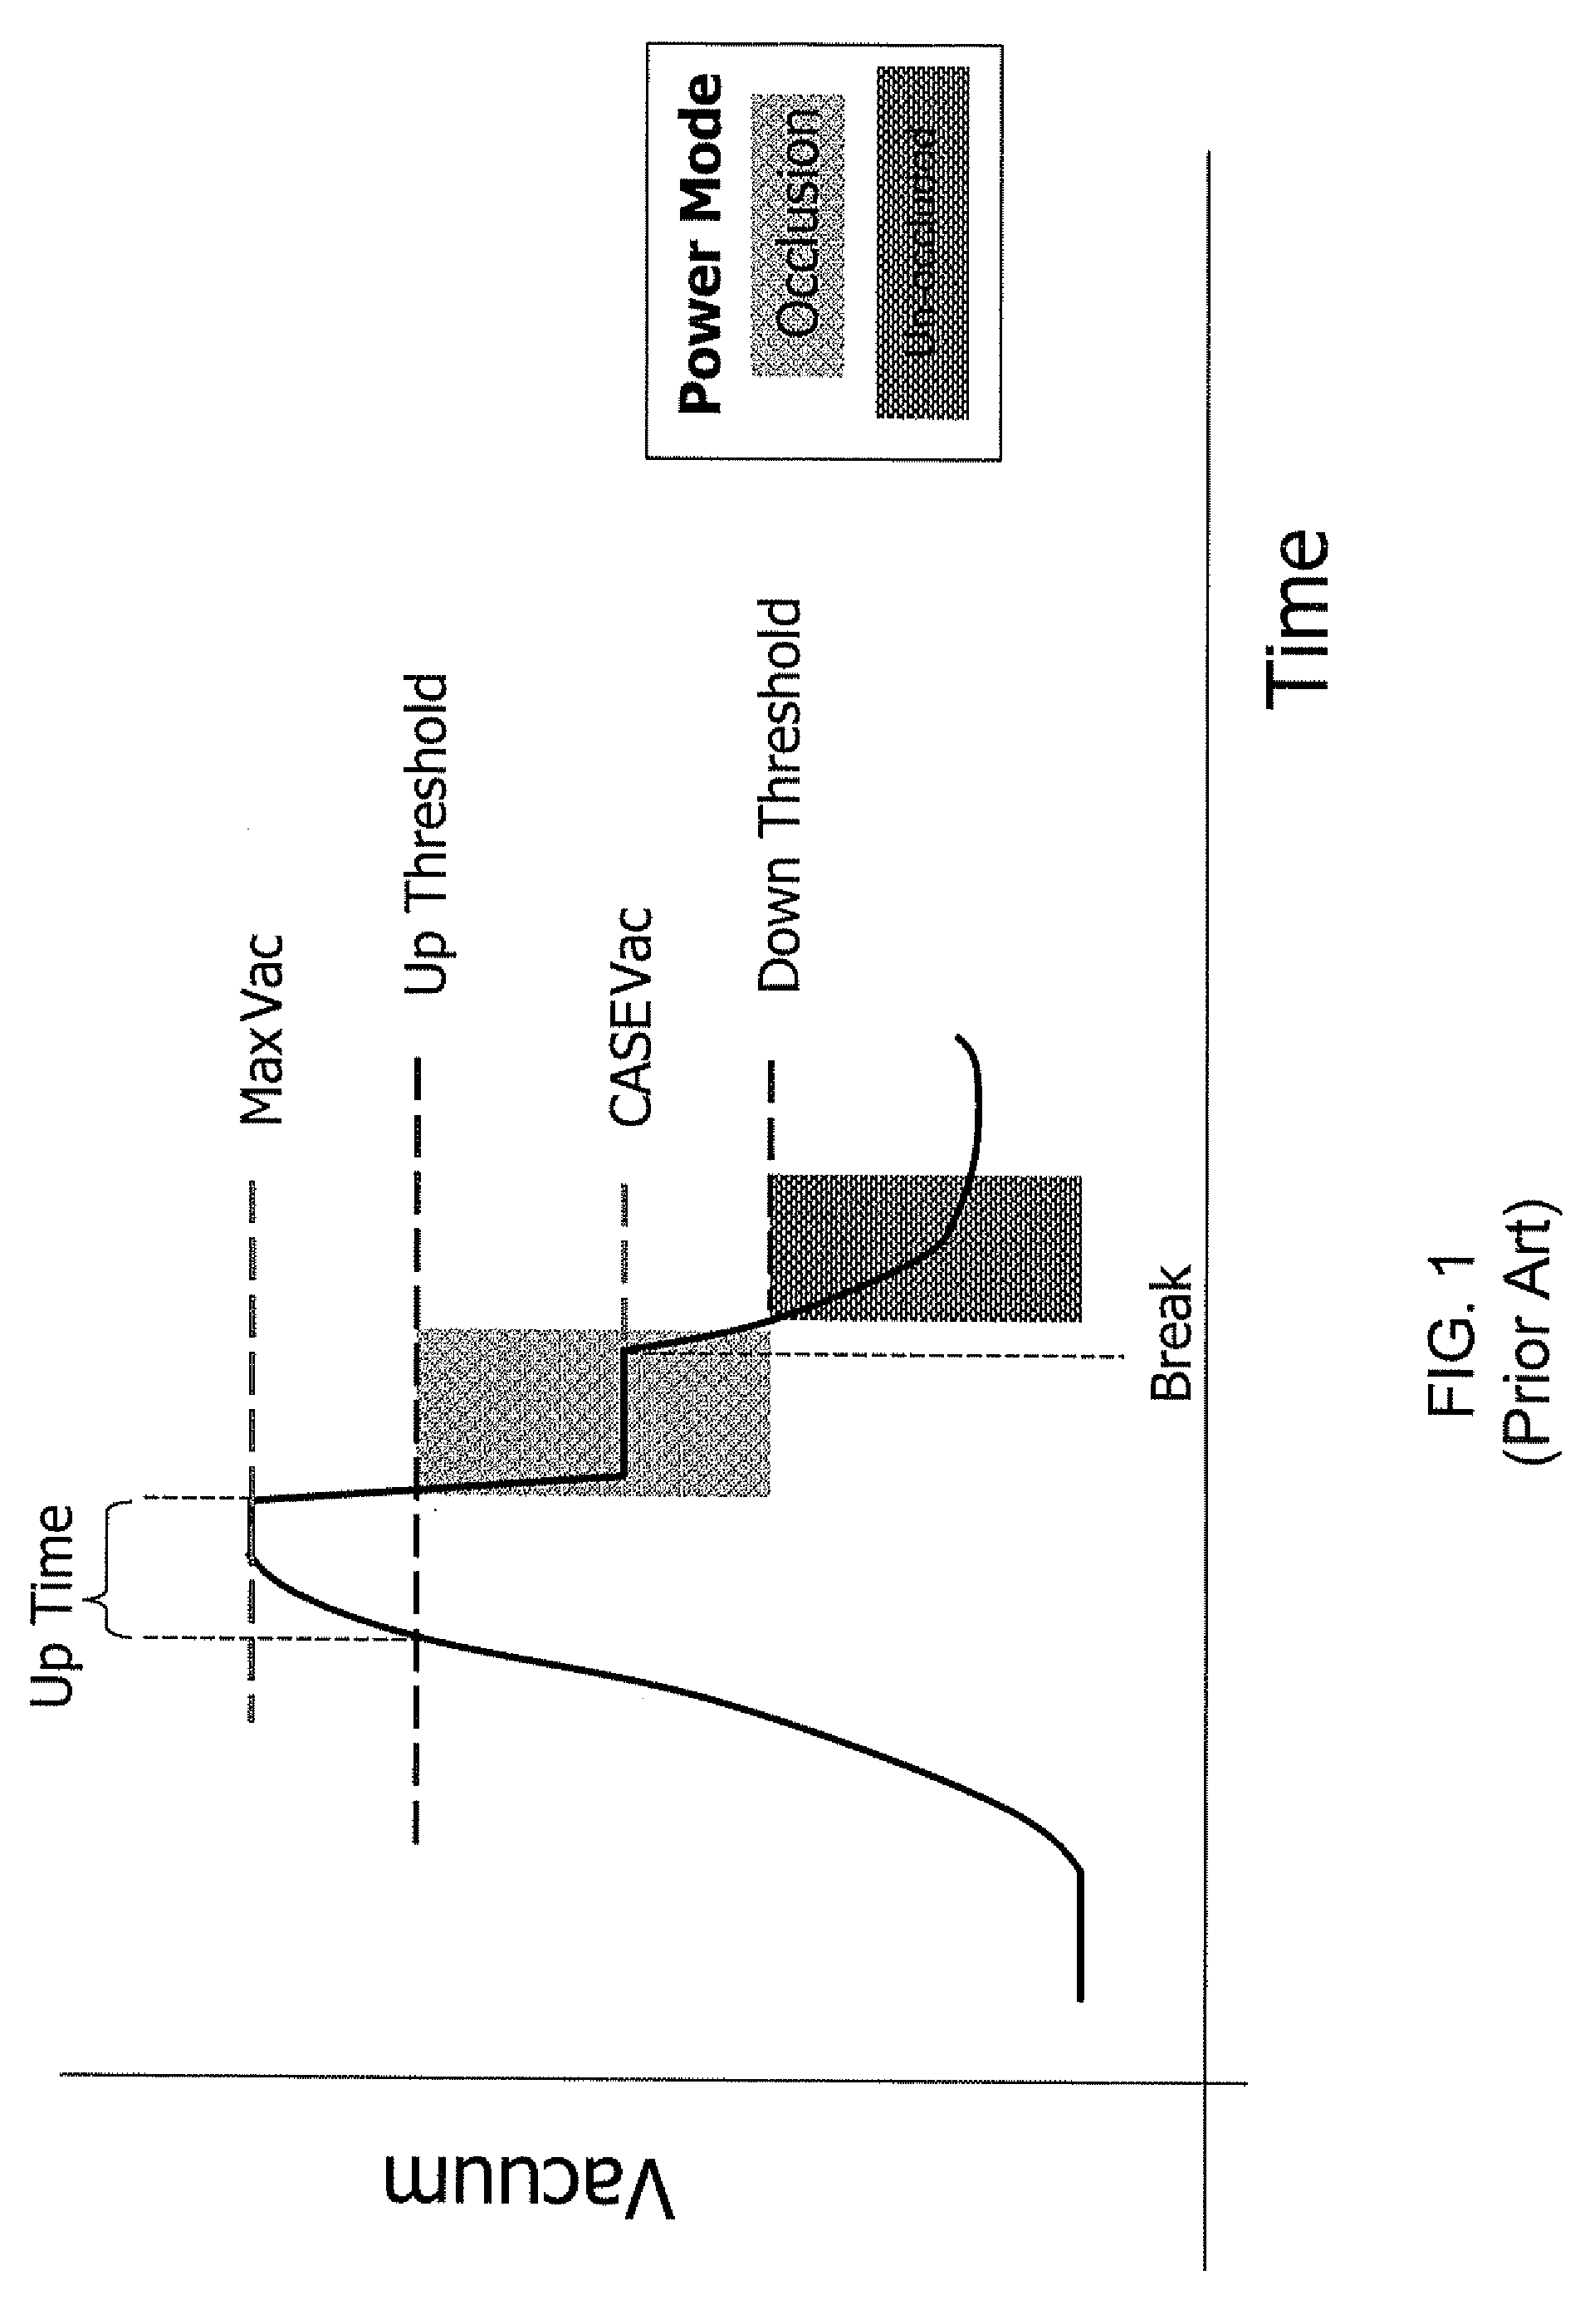 Systems and methods for enhanced occlusion removal during ophthalmic surgery